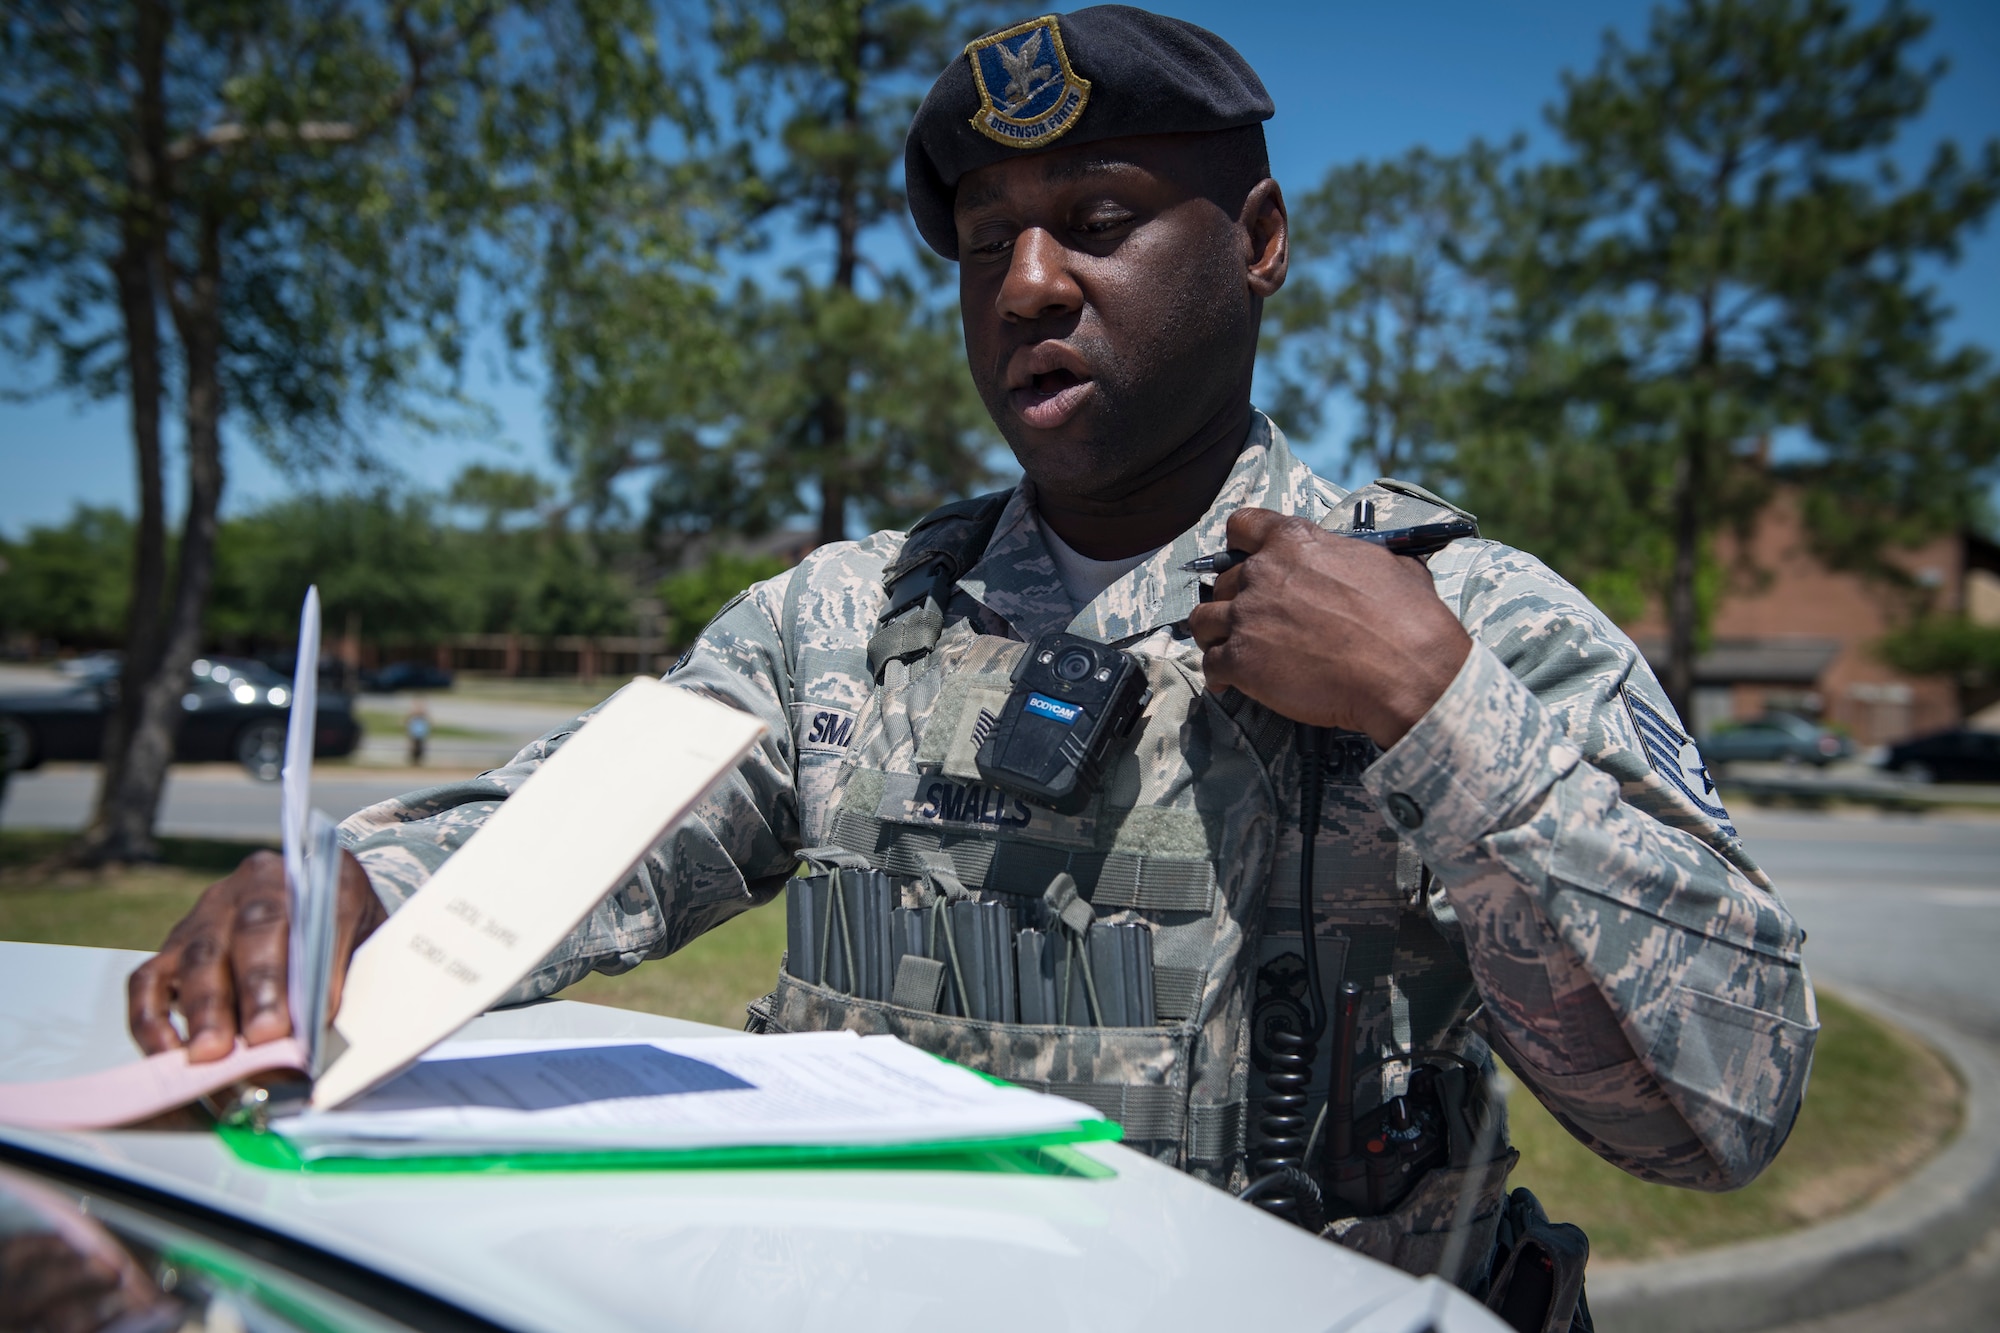 Tech. Sgt. Jamaal Smalls, 23d Security Forces Squadron (SFS) flight chief, relays information from a simulated distracted driving traffic stop to an operations center, April 17, 2018, at Moody Air Force Base, Ga. Since January 2018 there have been 13 distracted driving incidents at Moody, which has prompted the SFS patrolmen to heavily enforce distracted driver consequences for motorists on the installation. (U.S. Air Force photo by Senior Airman Janiqua P. Robinson)